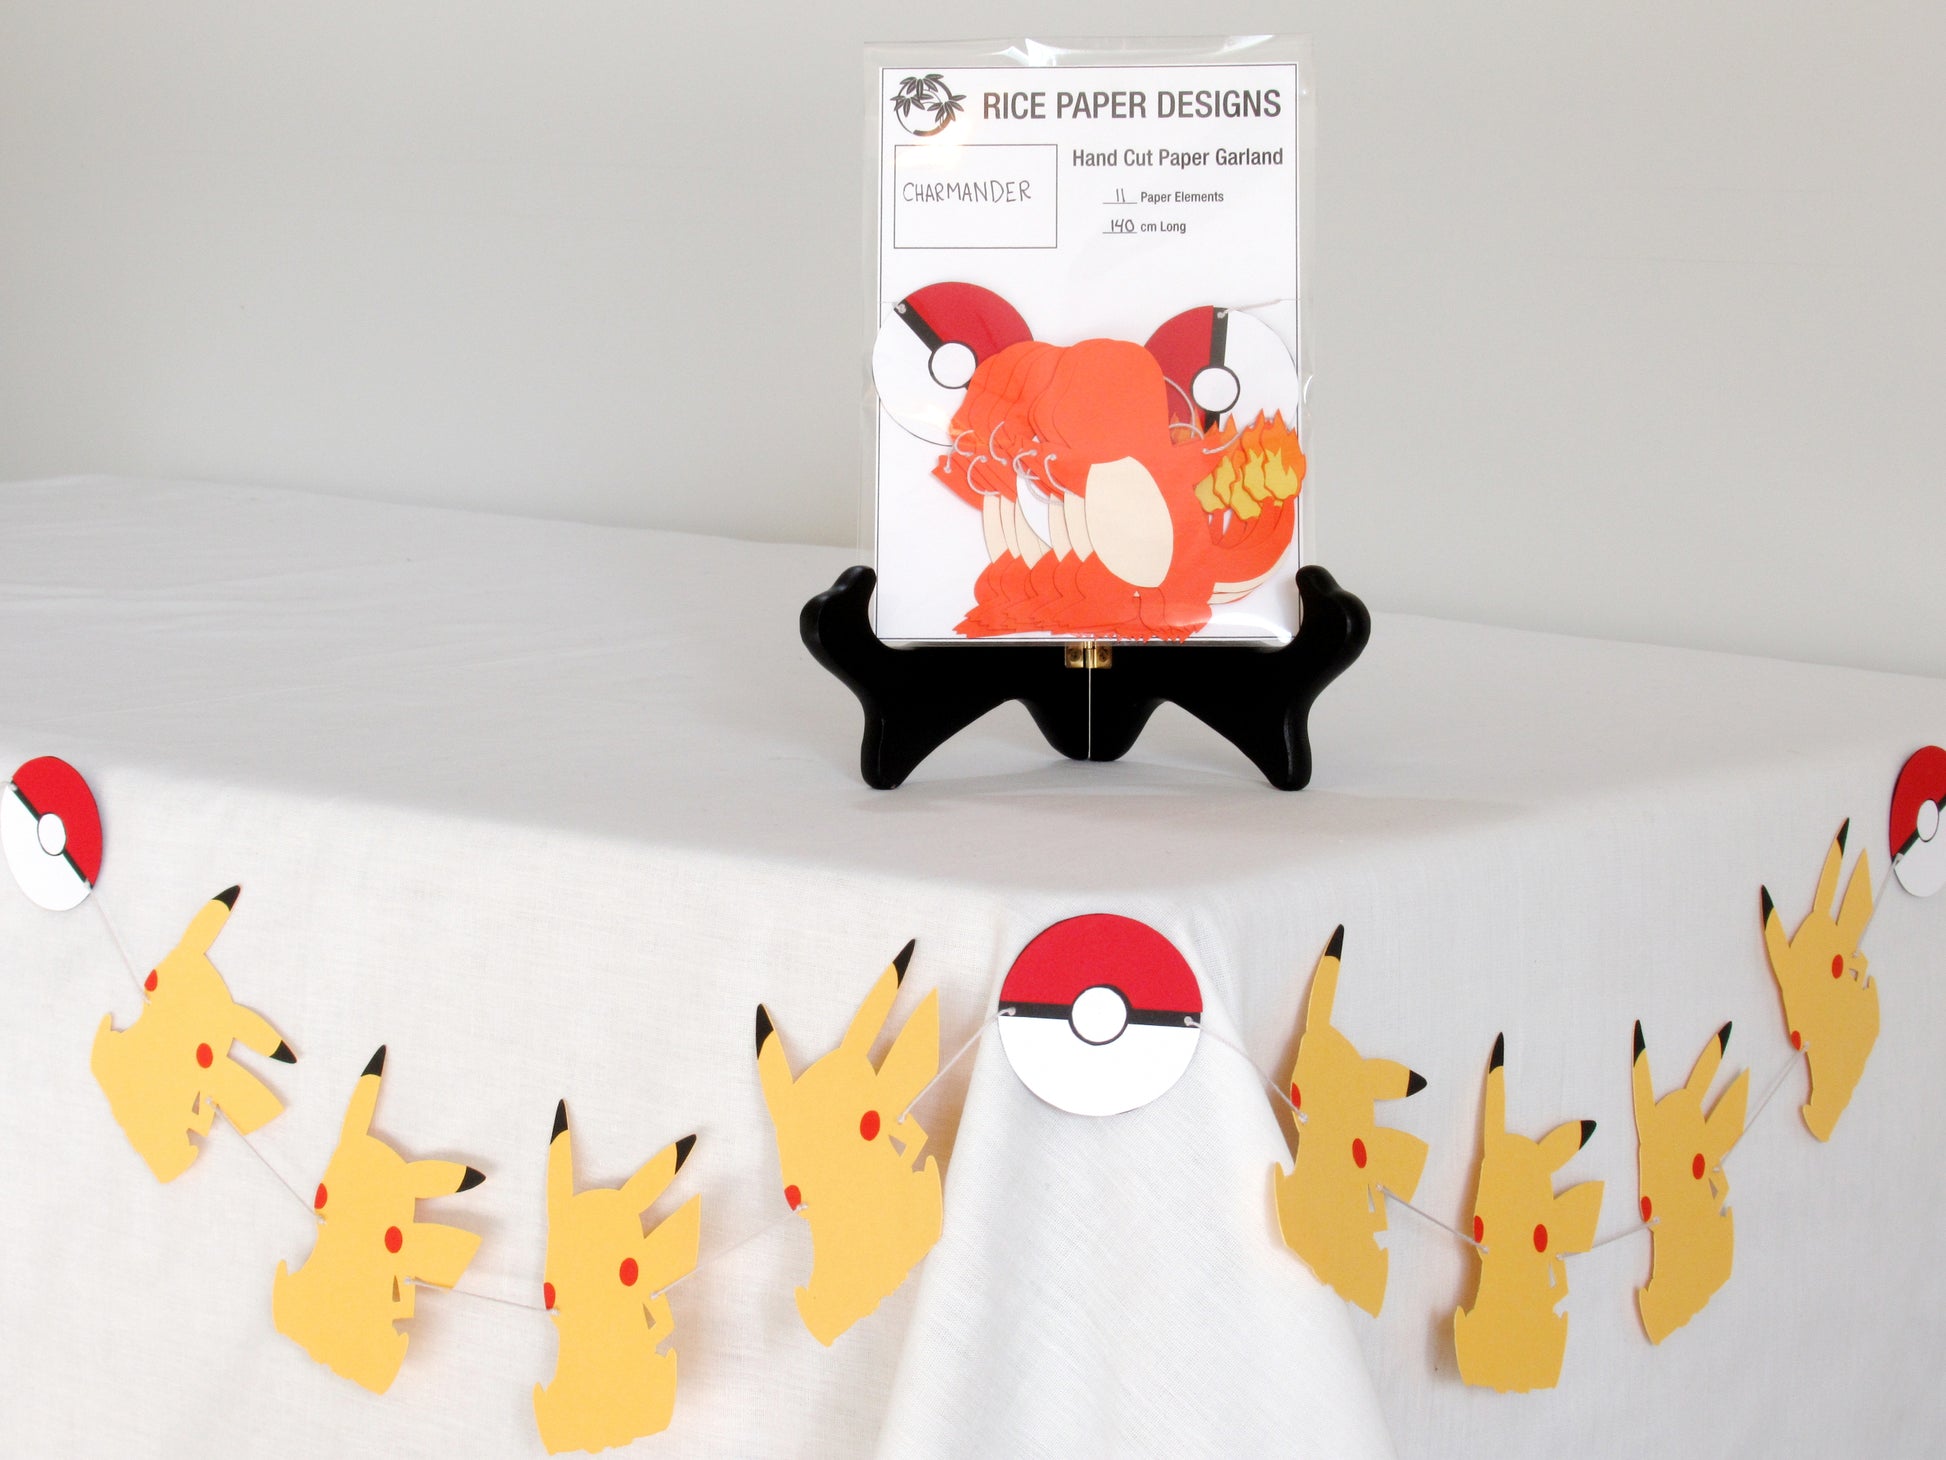 A garland with a series of paper charmanders and pokeballs arranged in neat bundle inside a clear bag. There is a paper behind them showing the Rice Paper Designs logo, and information about the garland. The bag is on a table, and below it is a sample garland with pikachu hung up.